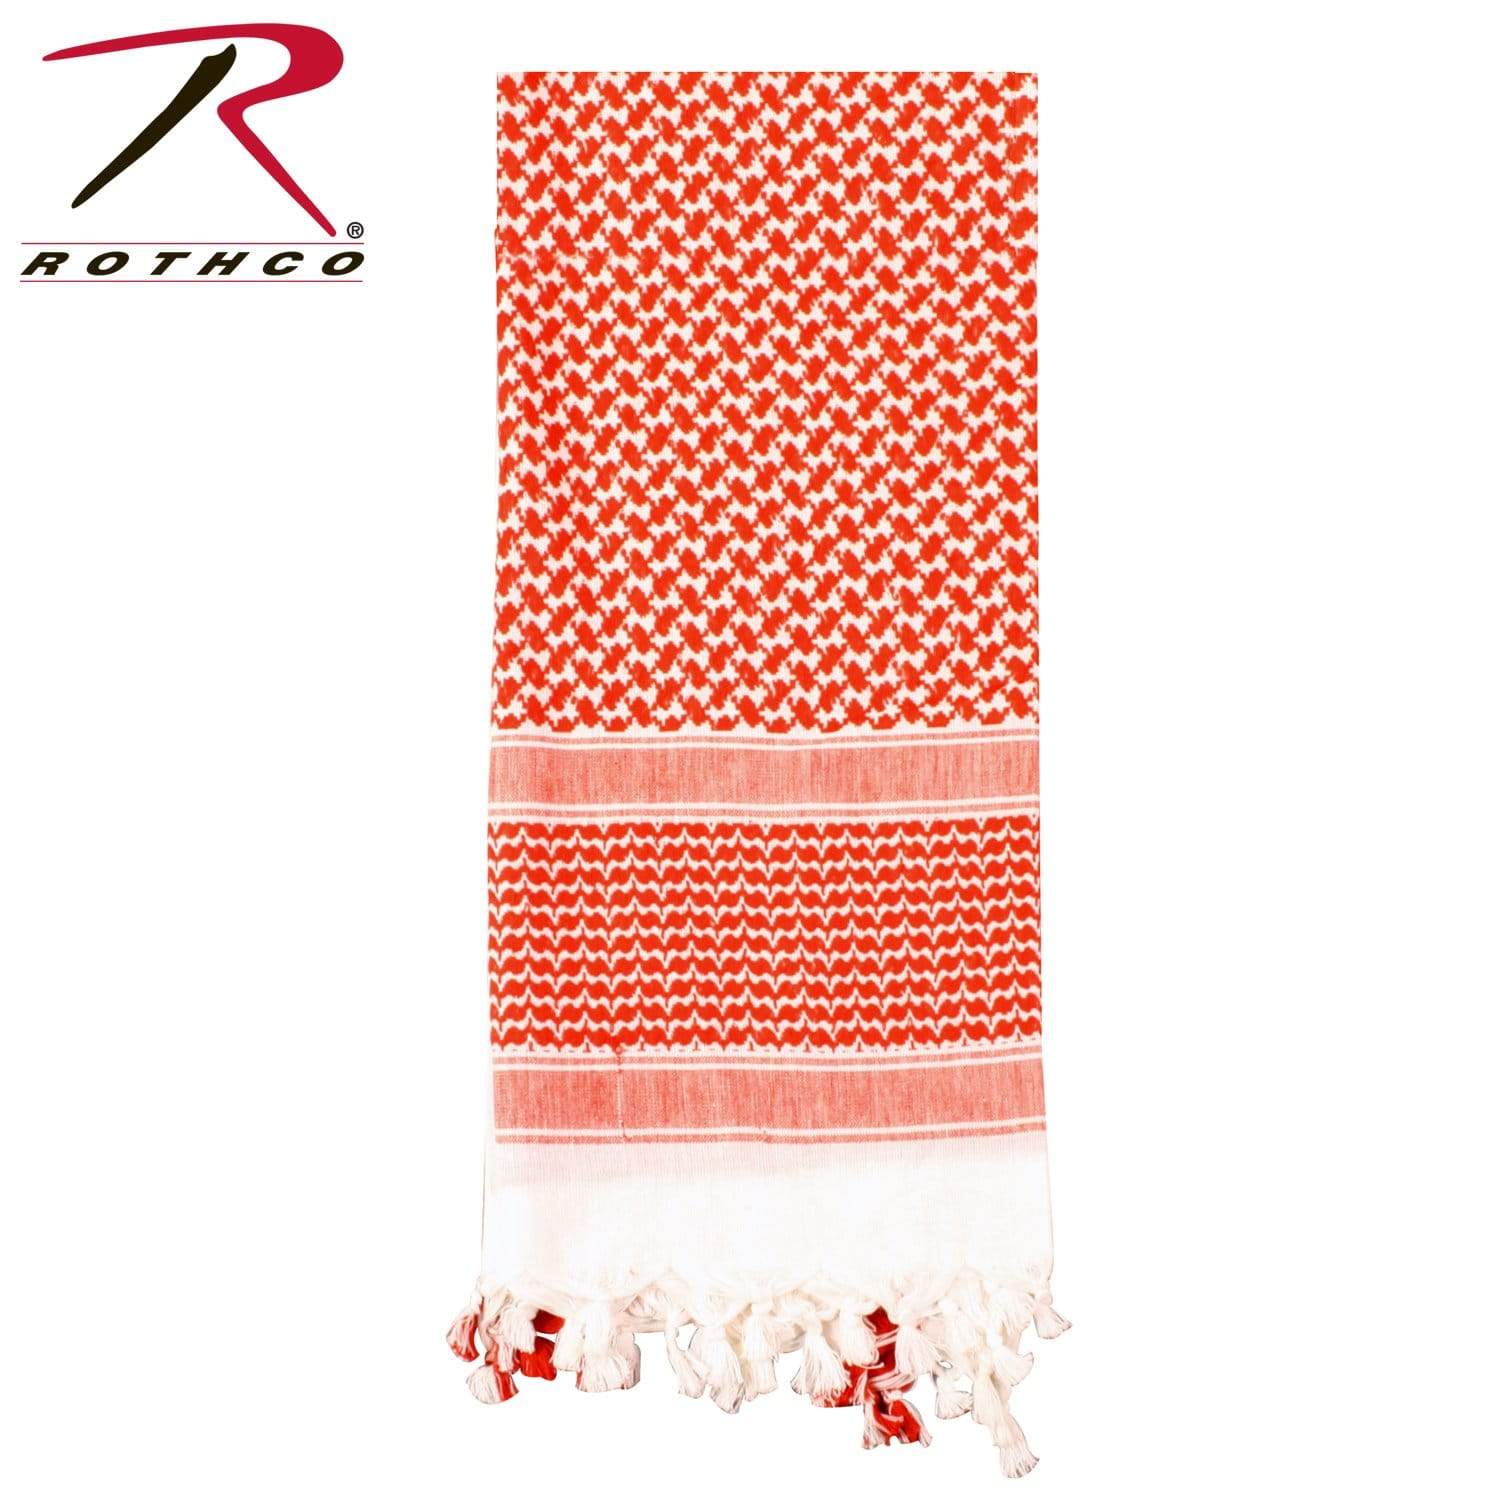 Rothco Shemagh Tactical Desert Keffiyeh Scarf - Red/White - Eminent Paintball And Airsoft